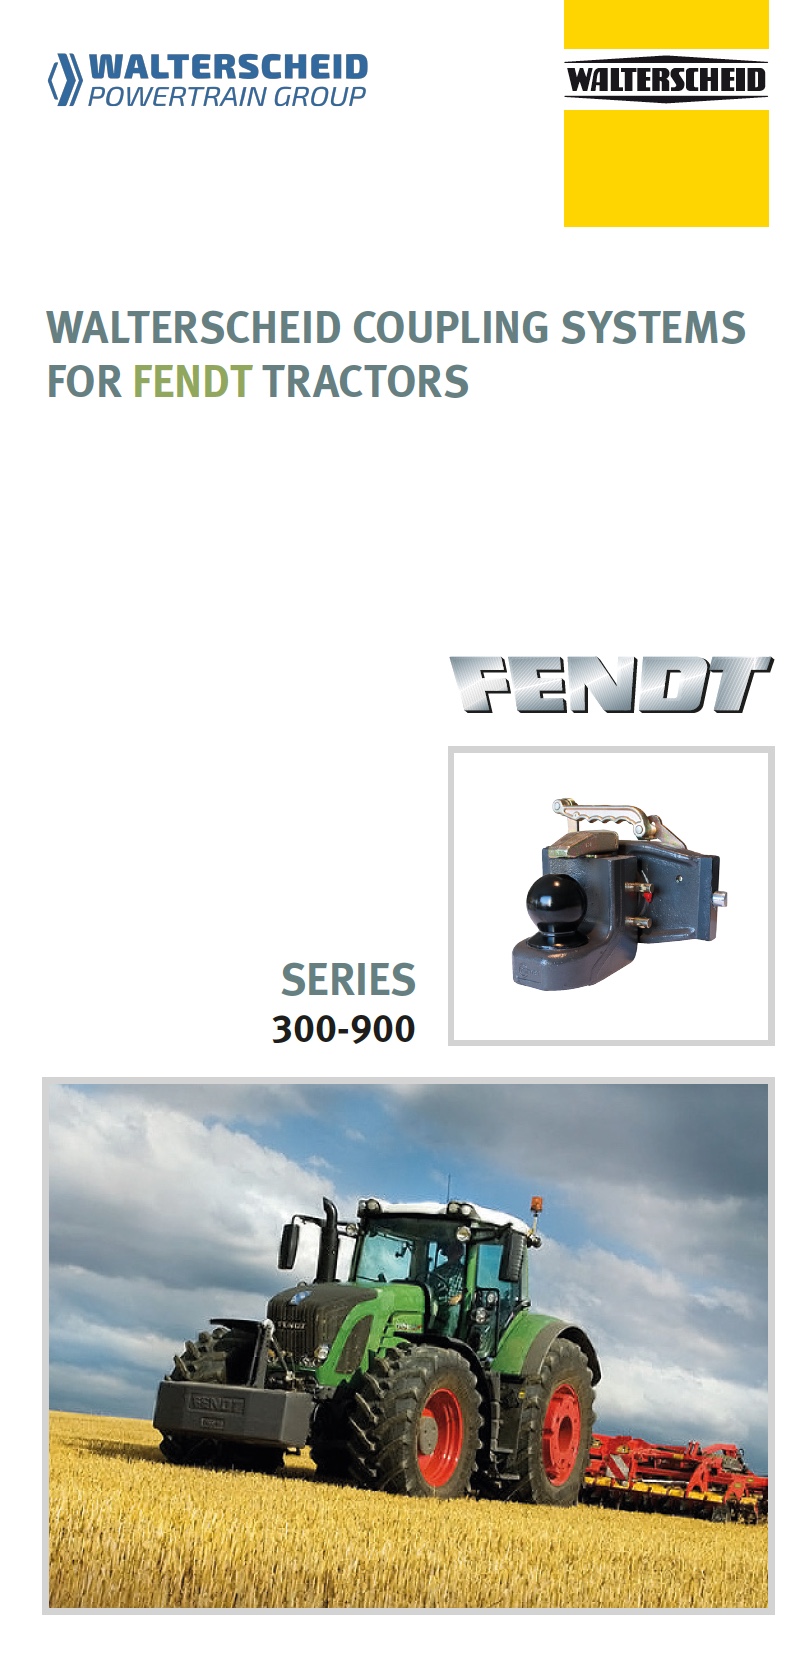 Coupling systems for Fendt tractors